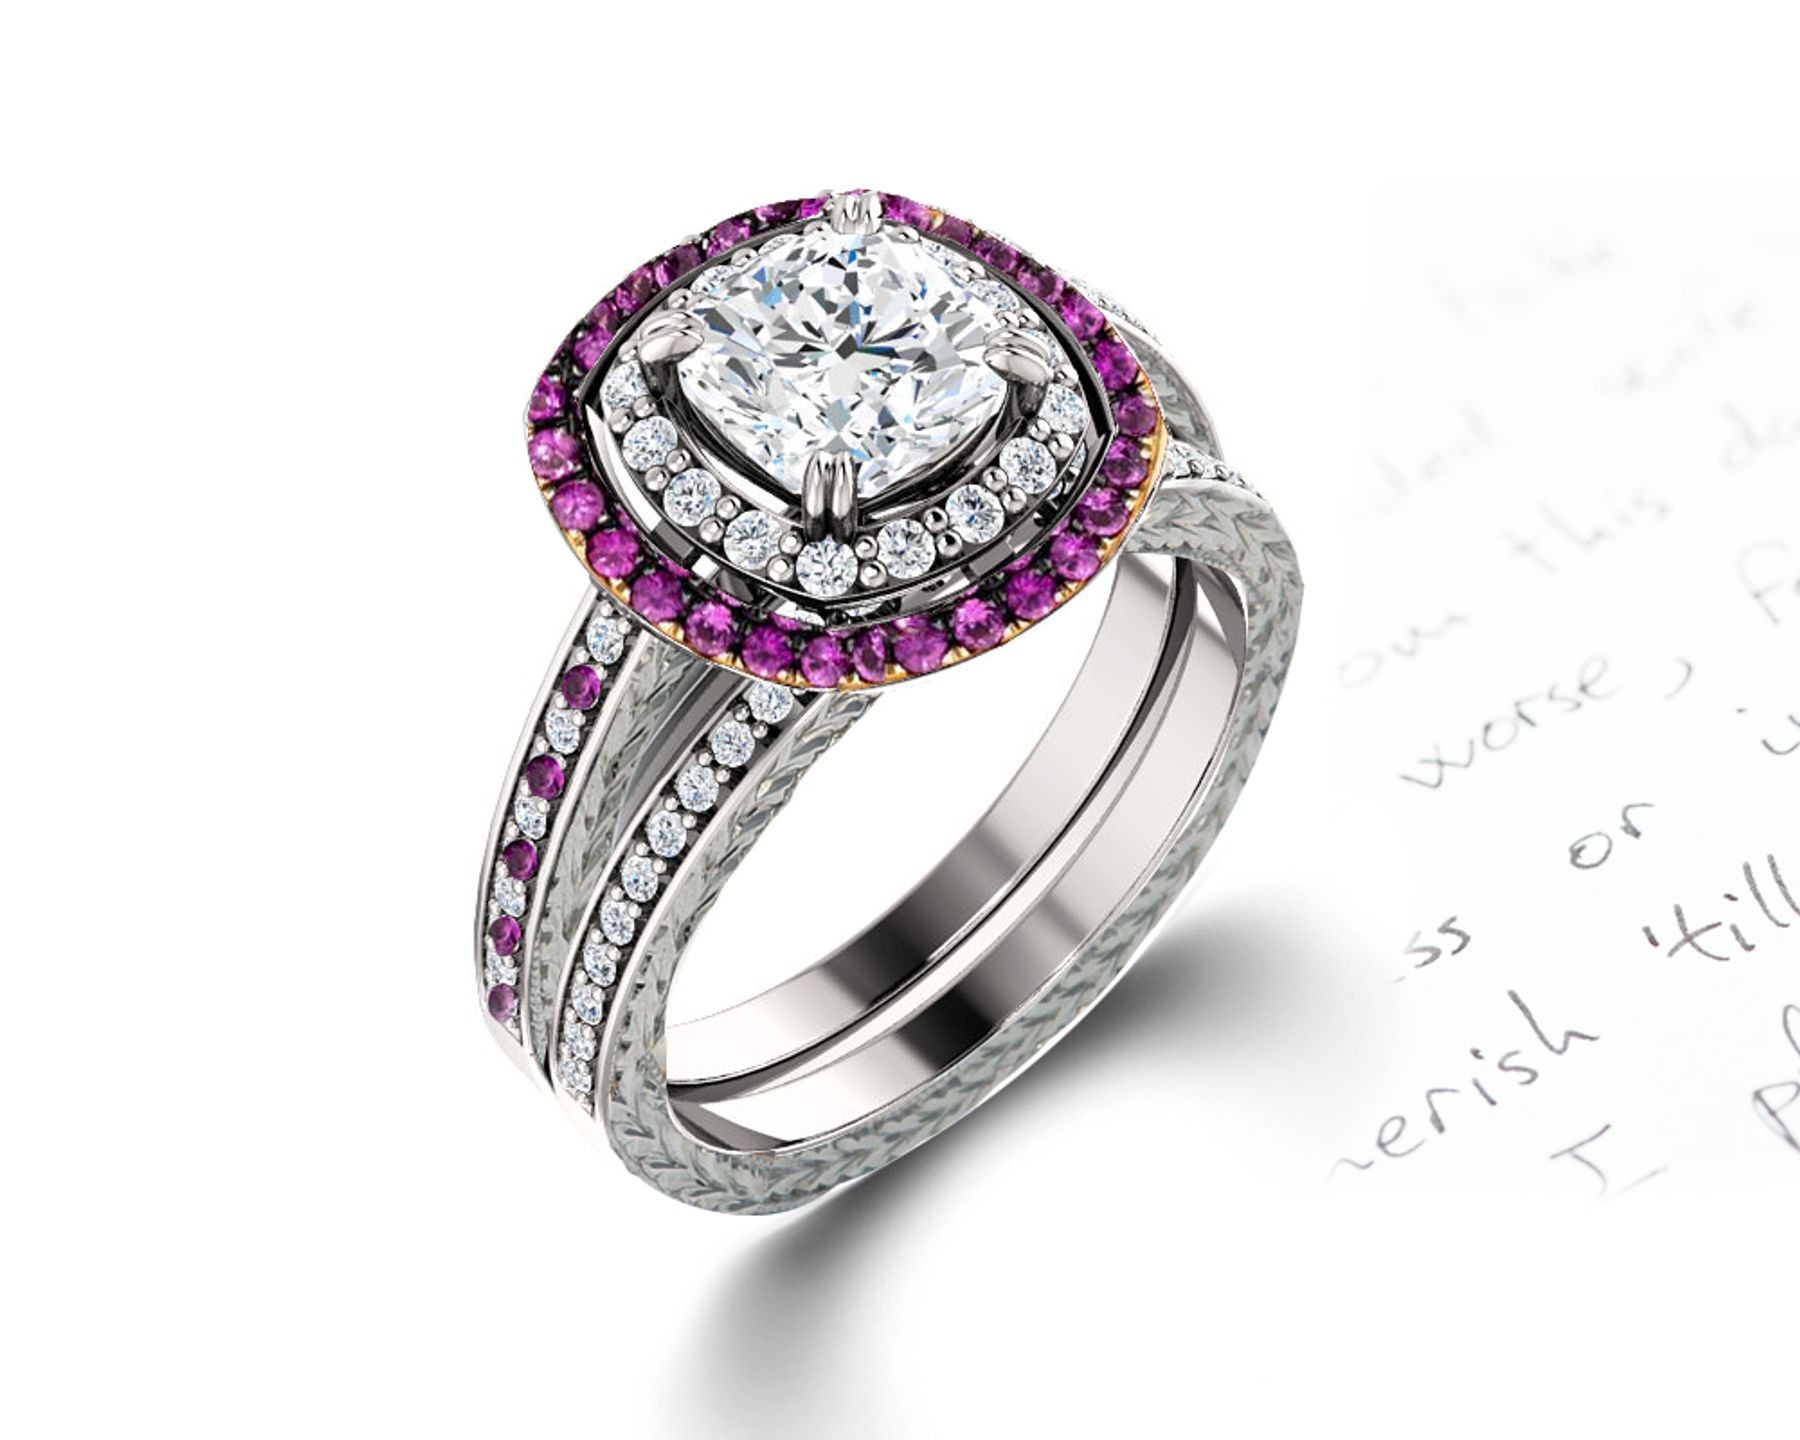 Vibrant Pink Sapphires and Diamonds Halo Micropave Engagement Rings With Vivid Colored Gemstone Accents